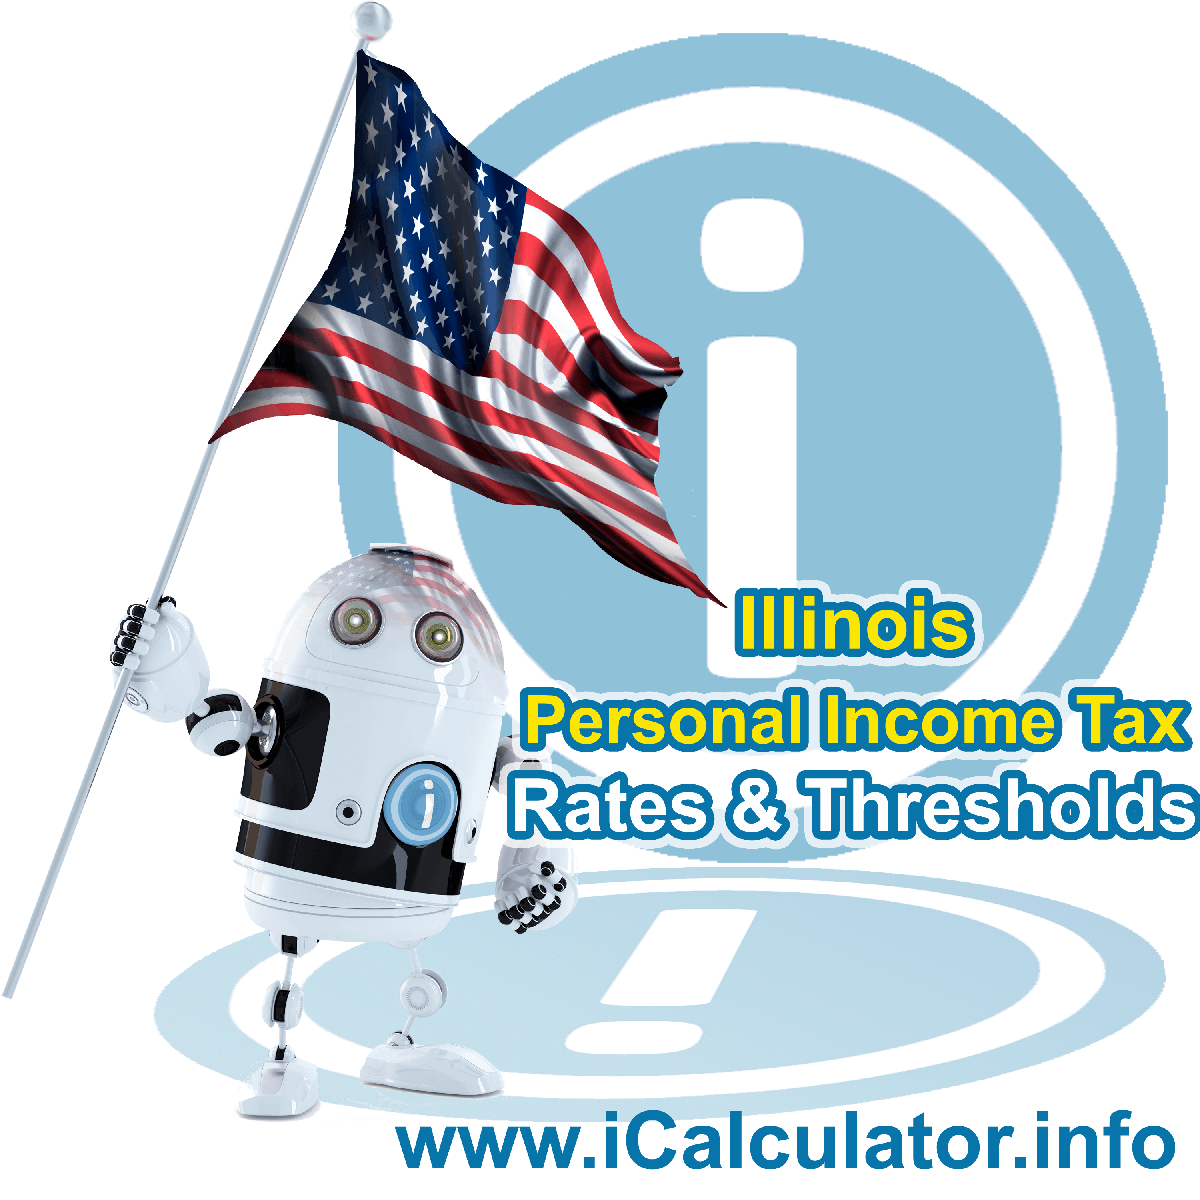 Illinois State Tax Tables 2022. This image displays details of the Illinois State Tax Tables for the 2022 tax return year which is provided in support of the 2022 US Tax Calculator